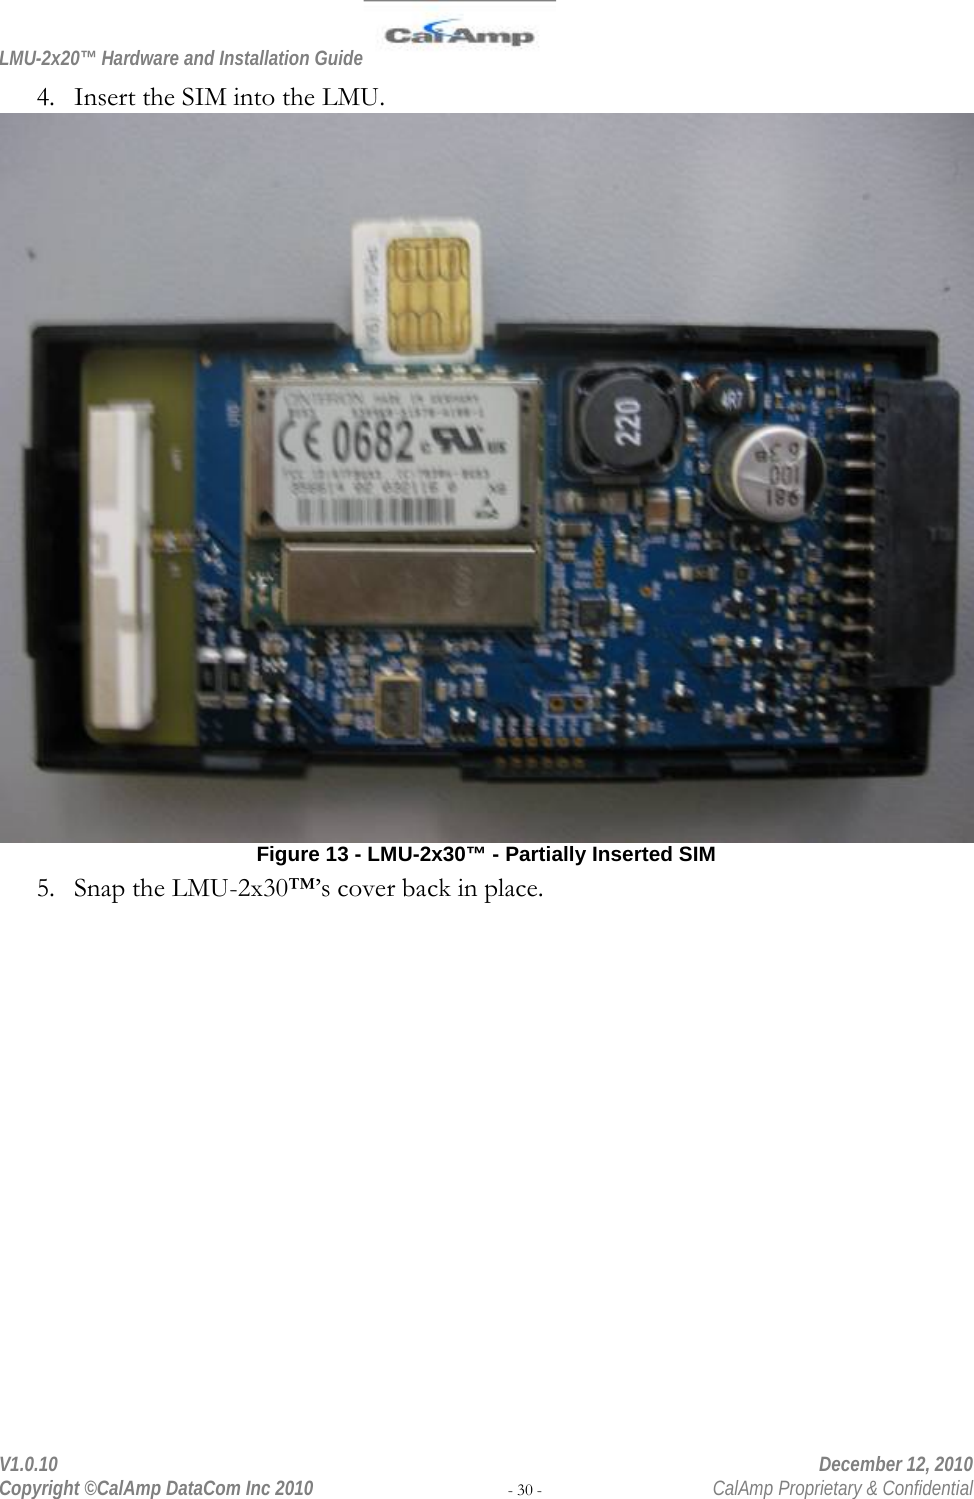 LMU-2x20™ Hardware and Installation Guide  V1.0.10    December 12, 2010 Copyright ©CalAmp DataCom Inc 2010 - 30 -  CalAmp Proprietary &amp; Confidential 4. Insert the SIM into the LMU.  Figure 13 - LMU-2x30™ - Partially Inserted SIM 5. Snap the LMU-2x30™’s cover back in place. 